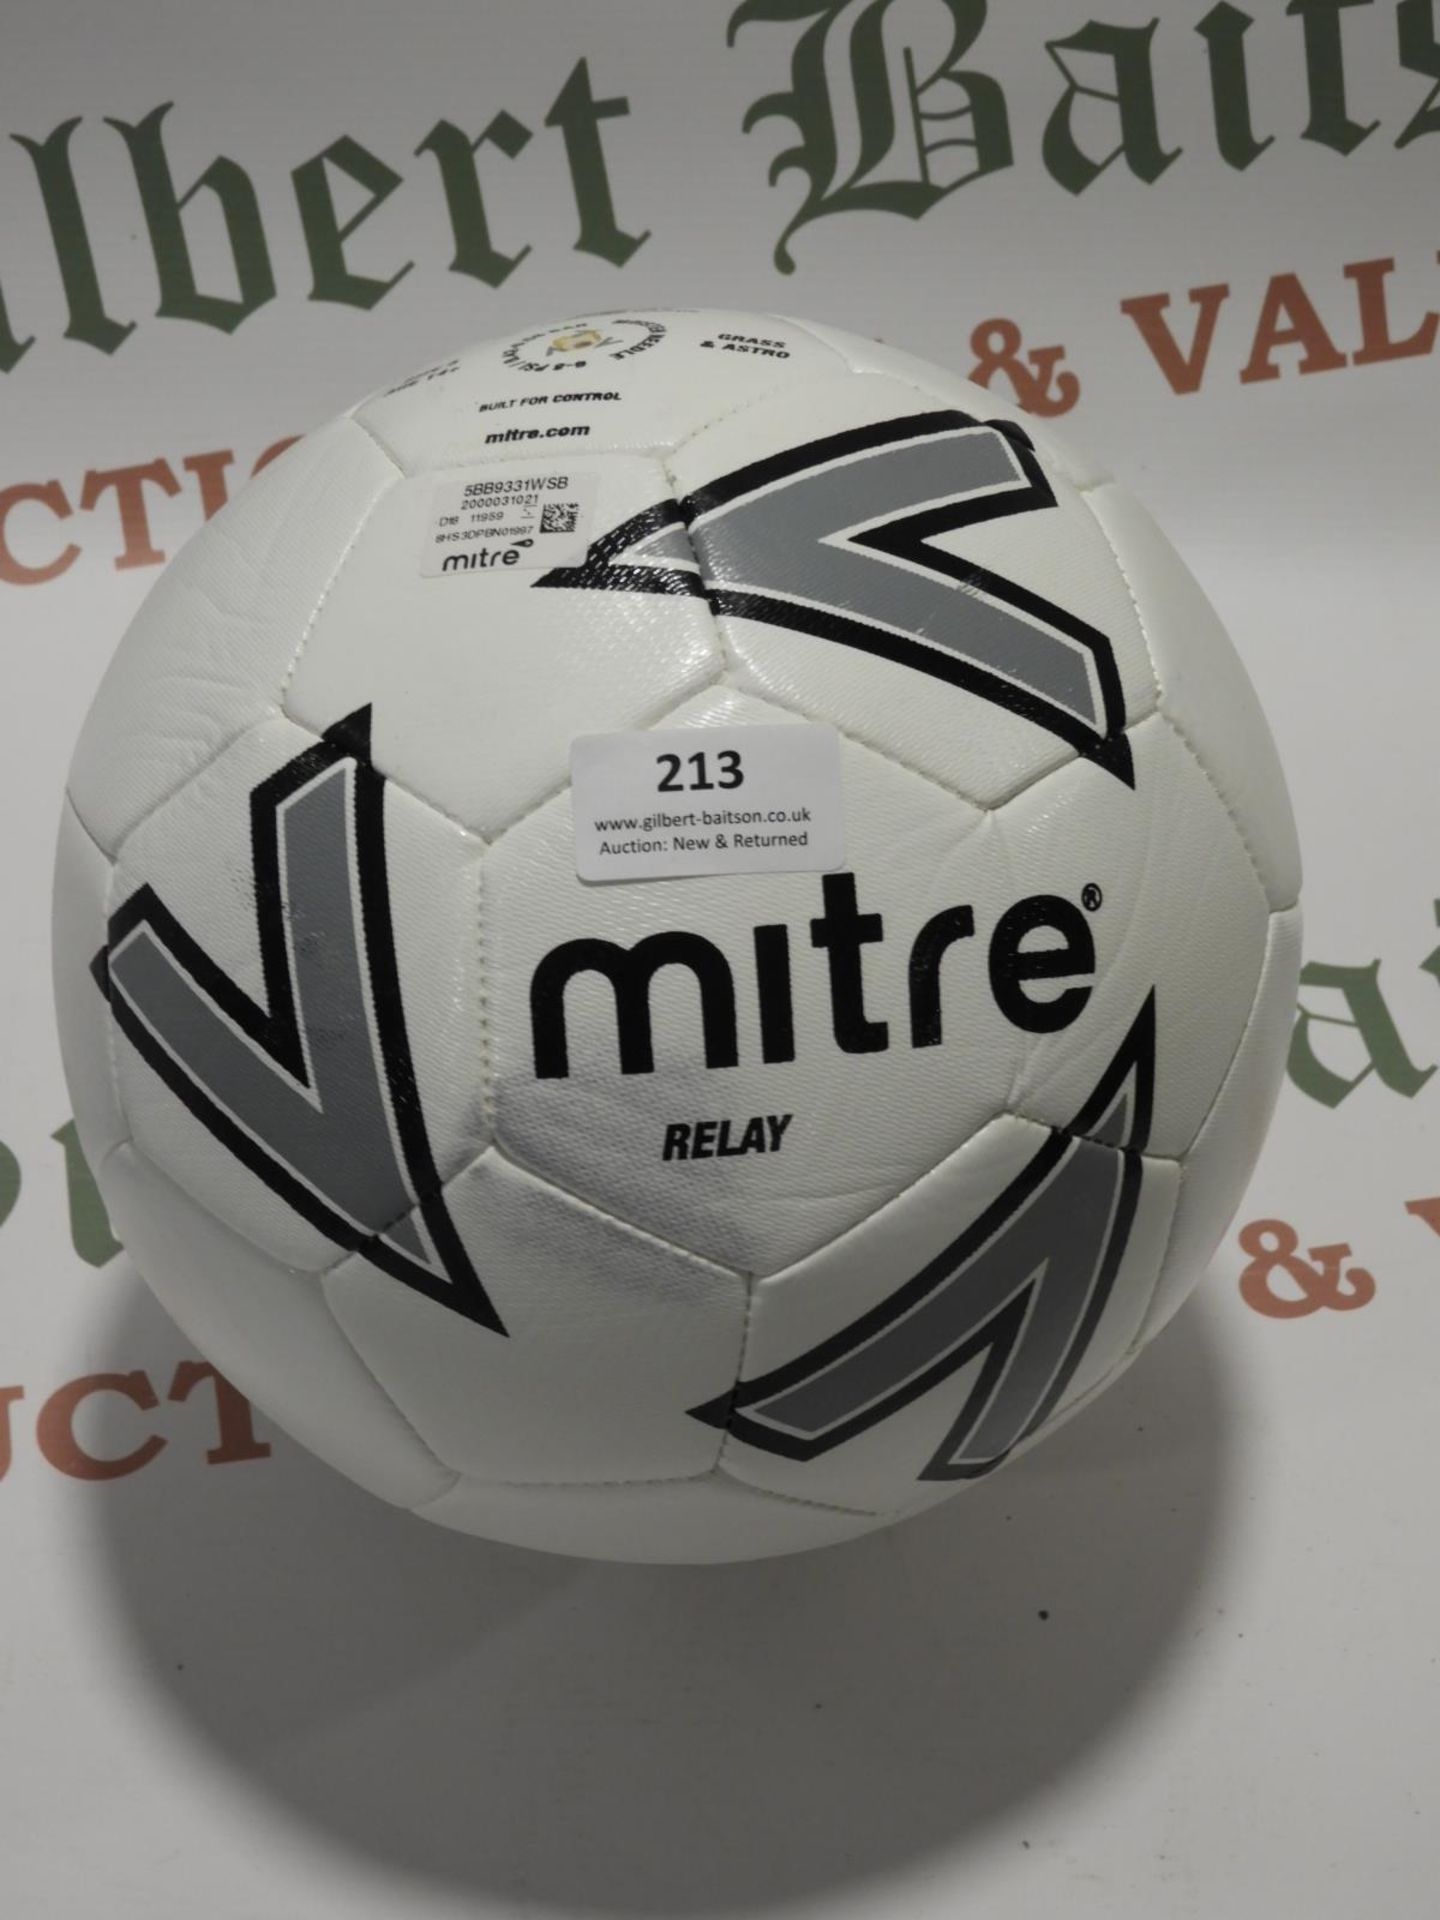 *Mitre Relay Size: 4 Football